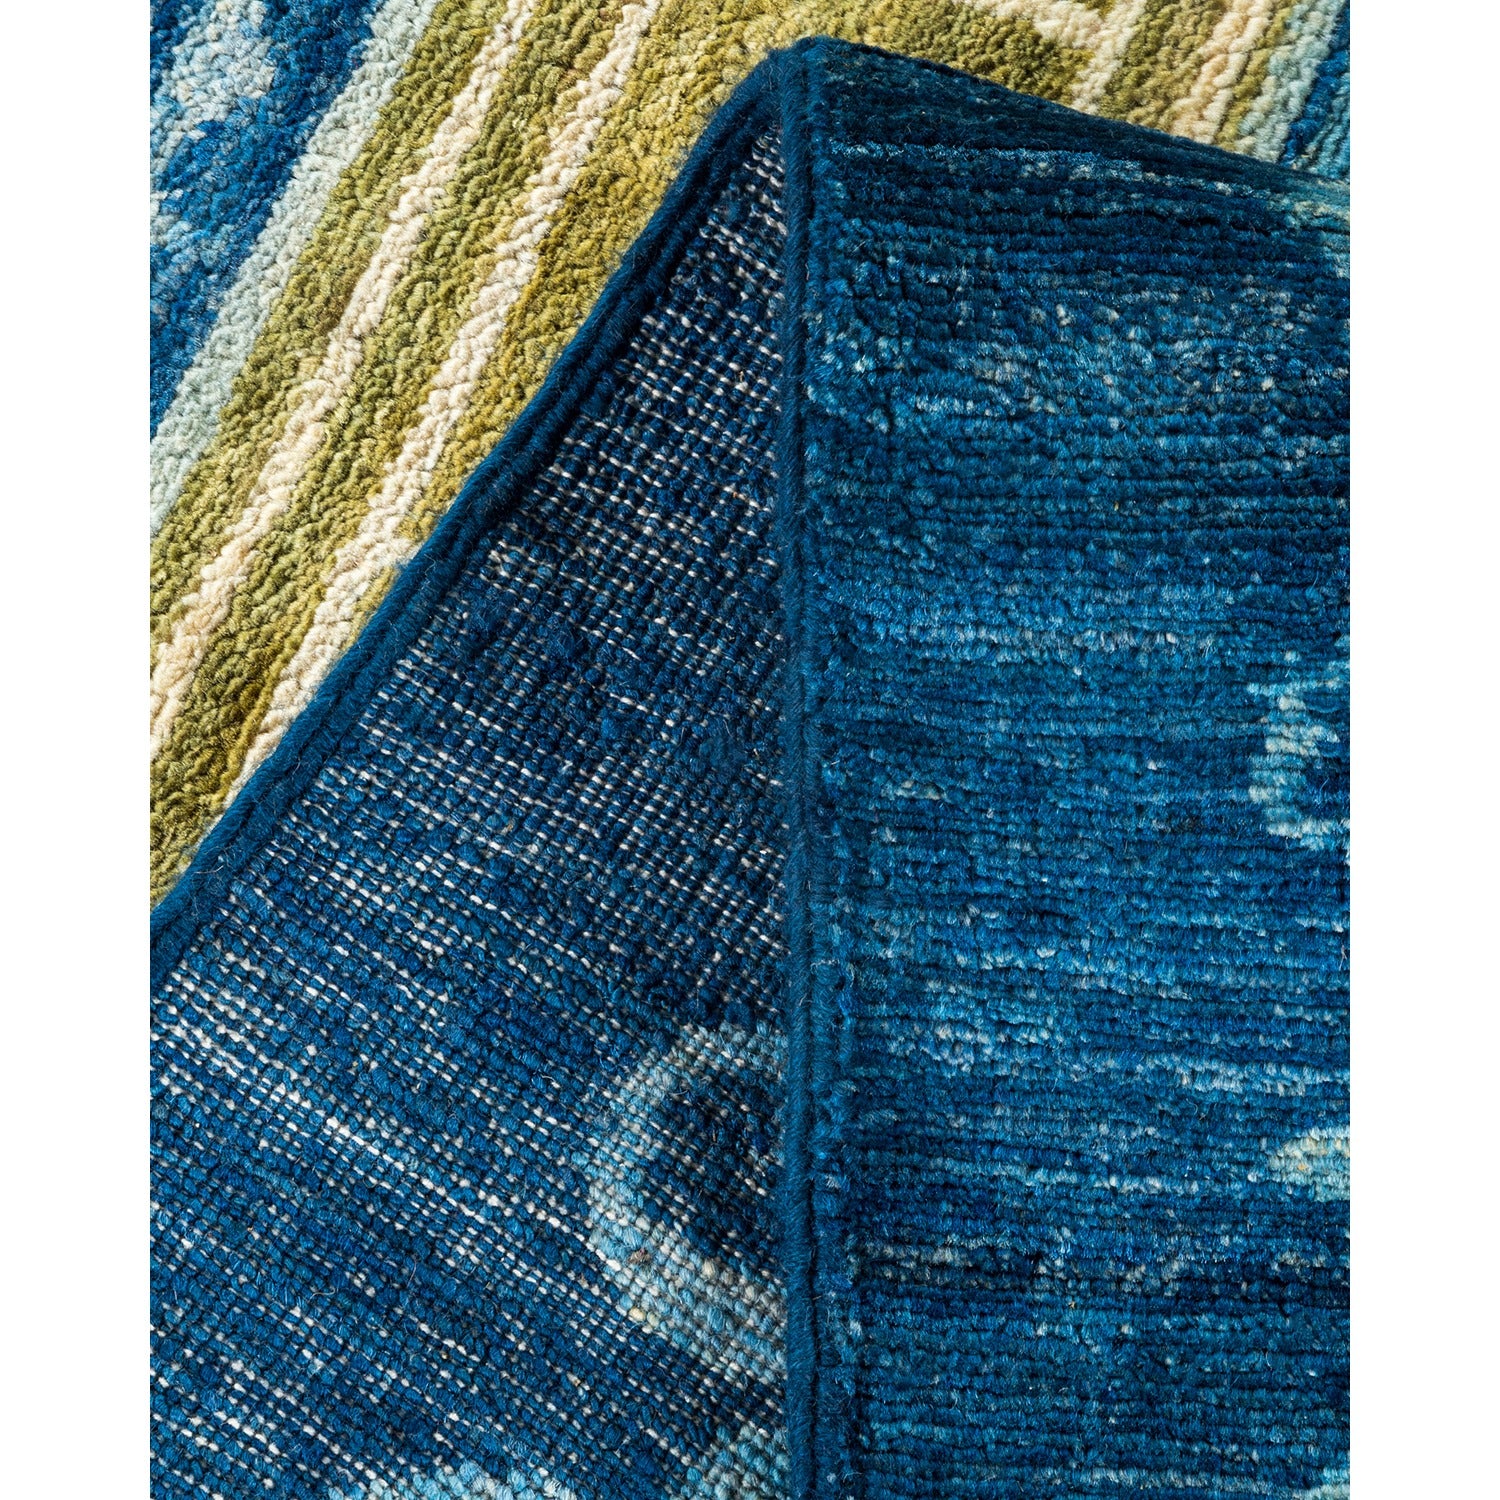 Close-up of a textured blue fabric with folded edge and striped background.